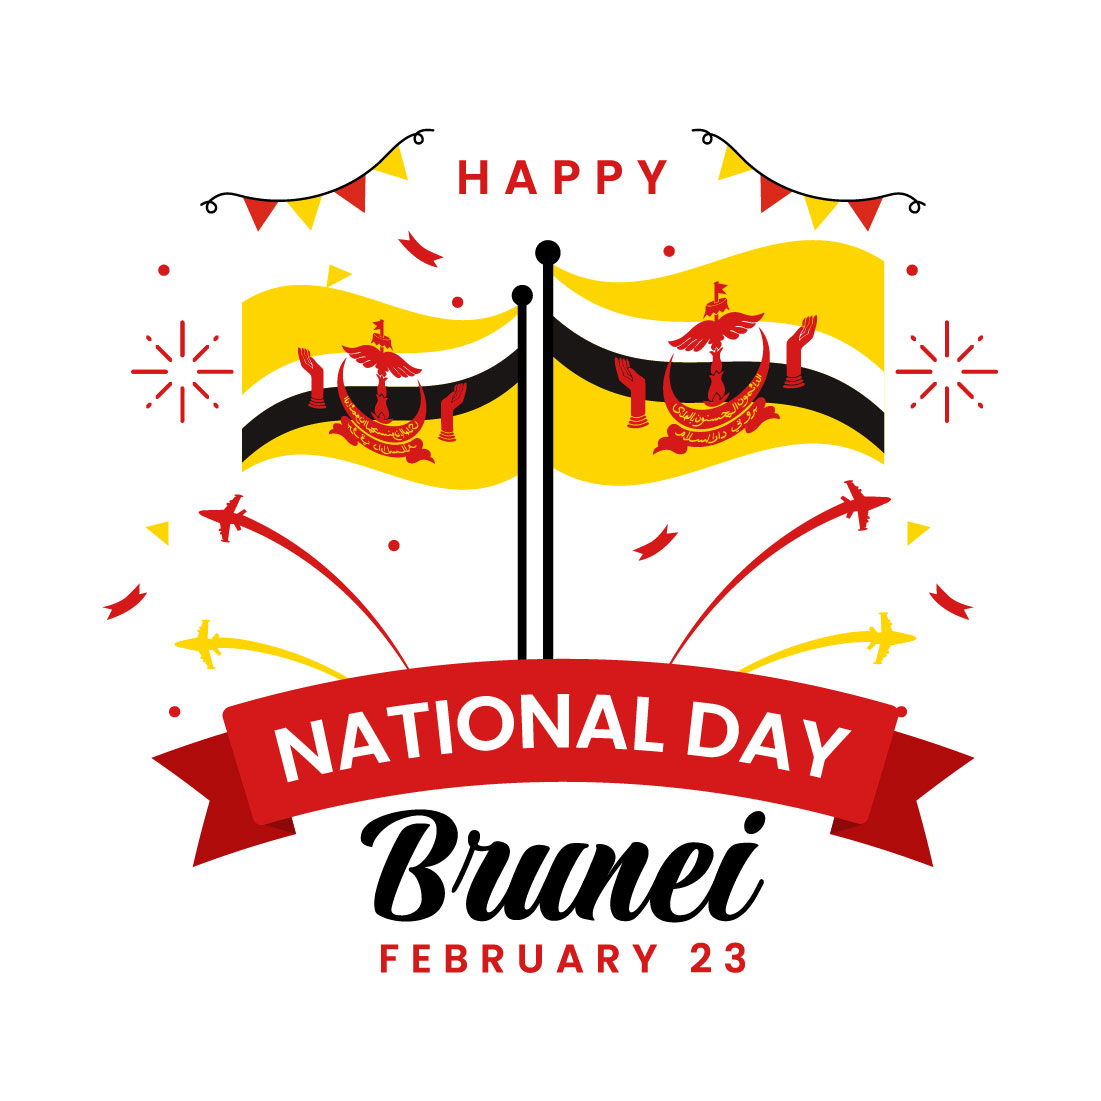 13 Brunei Darussalam National Day Illustration preview image.